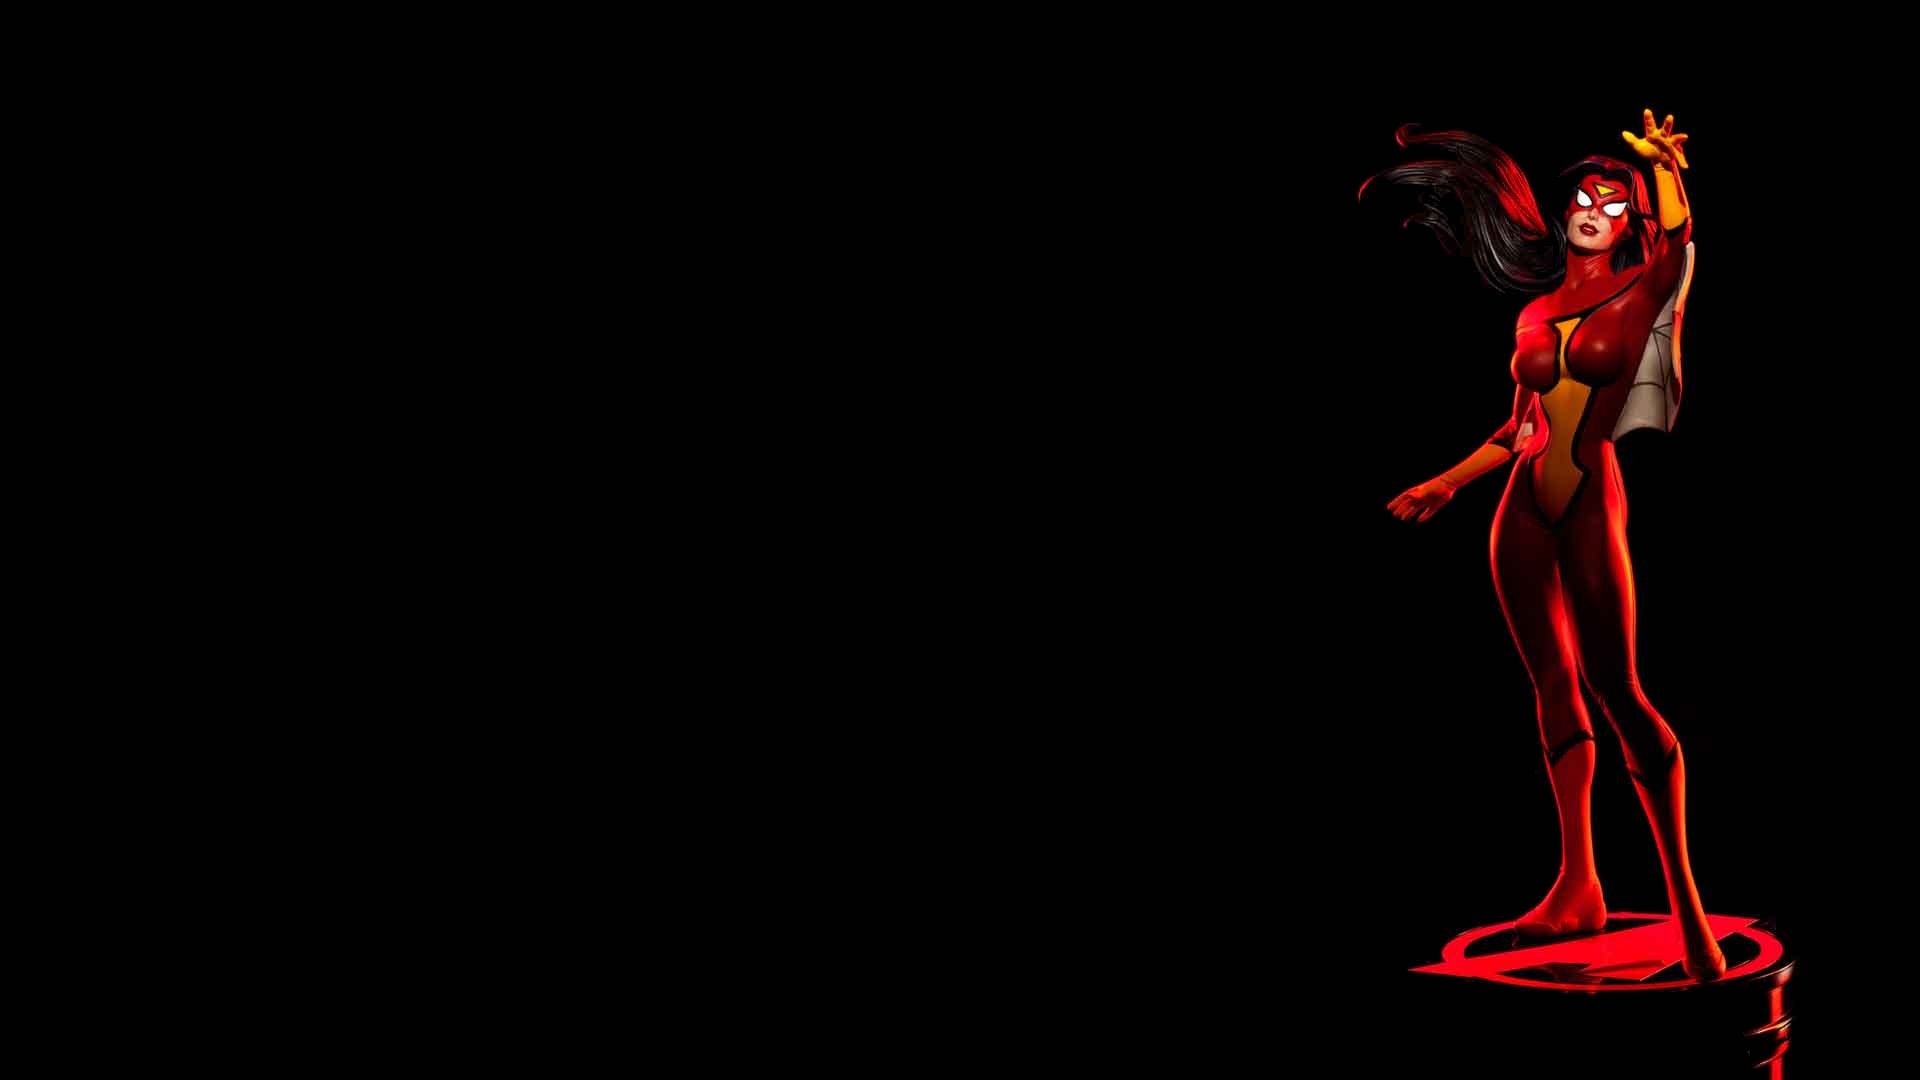 Download full hd 1920x1080 Spider-Woman desktop background ID:391187 for free